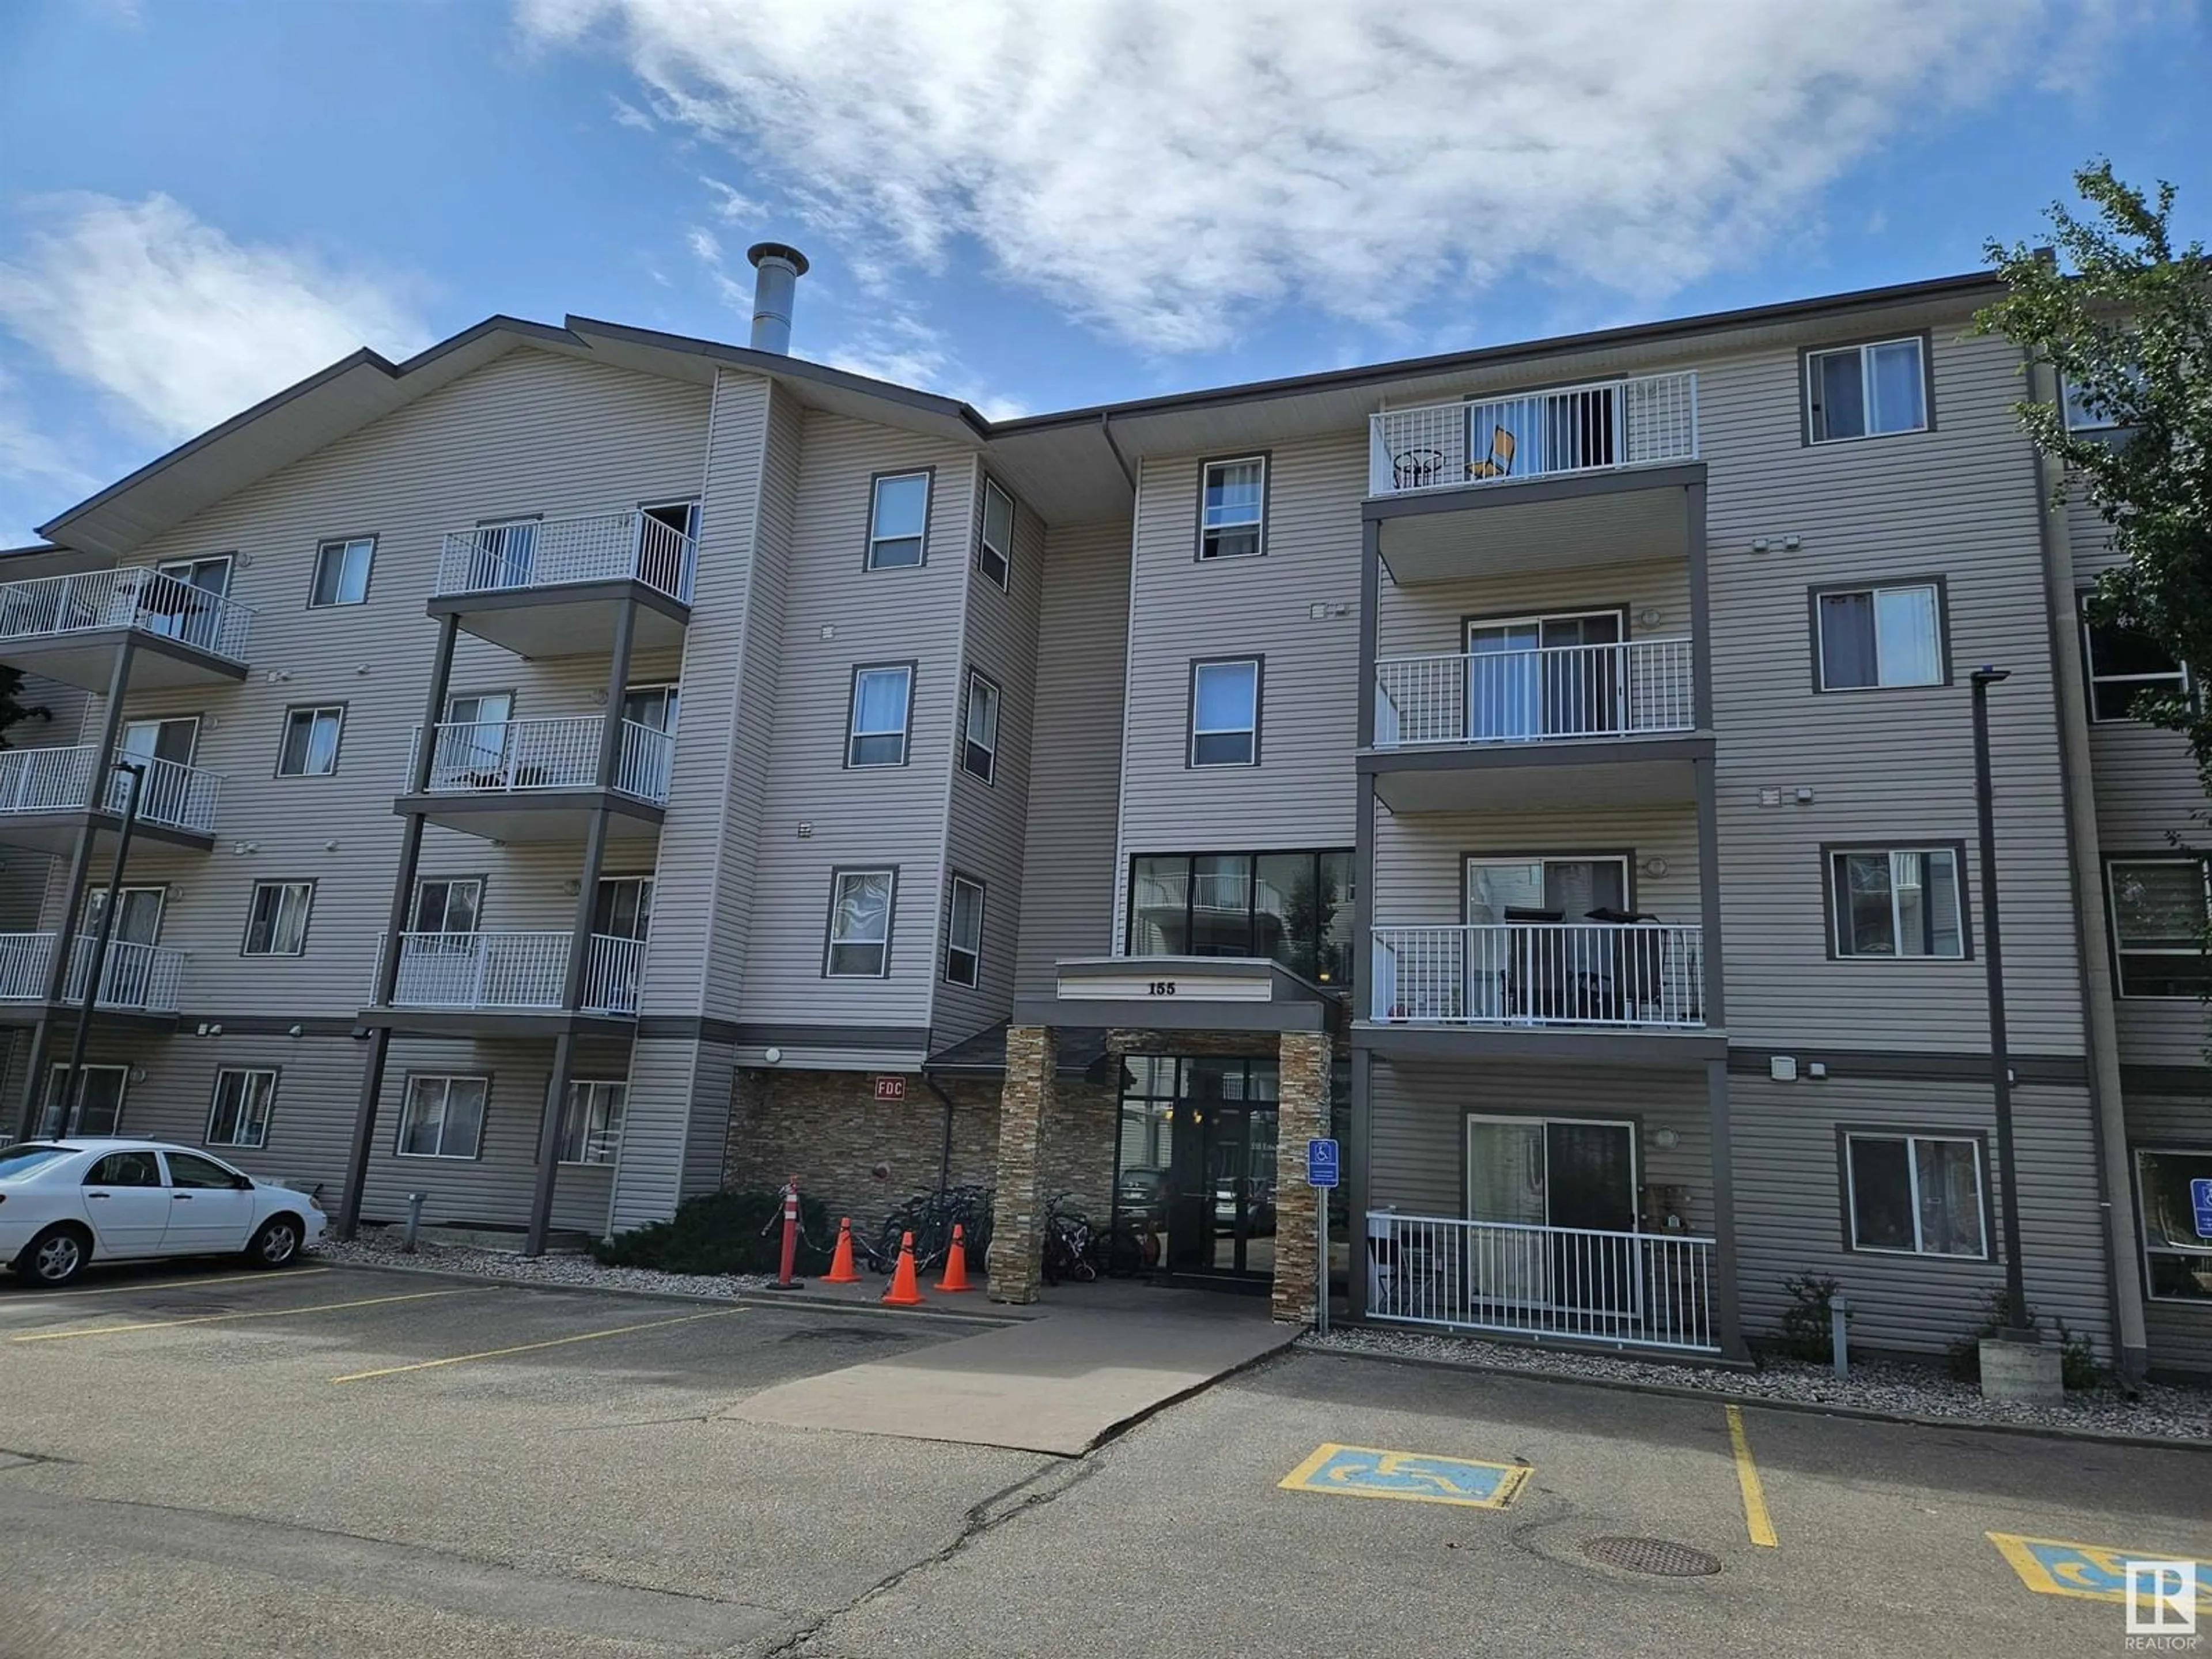 A pic from exterior of the house or condo for #403 155 EDWARDS DR SW, Edmonton Alberta T6X1N6